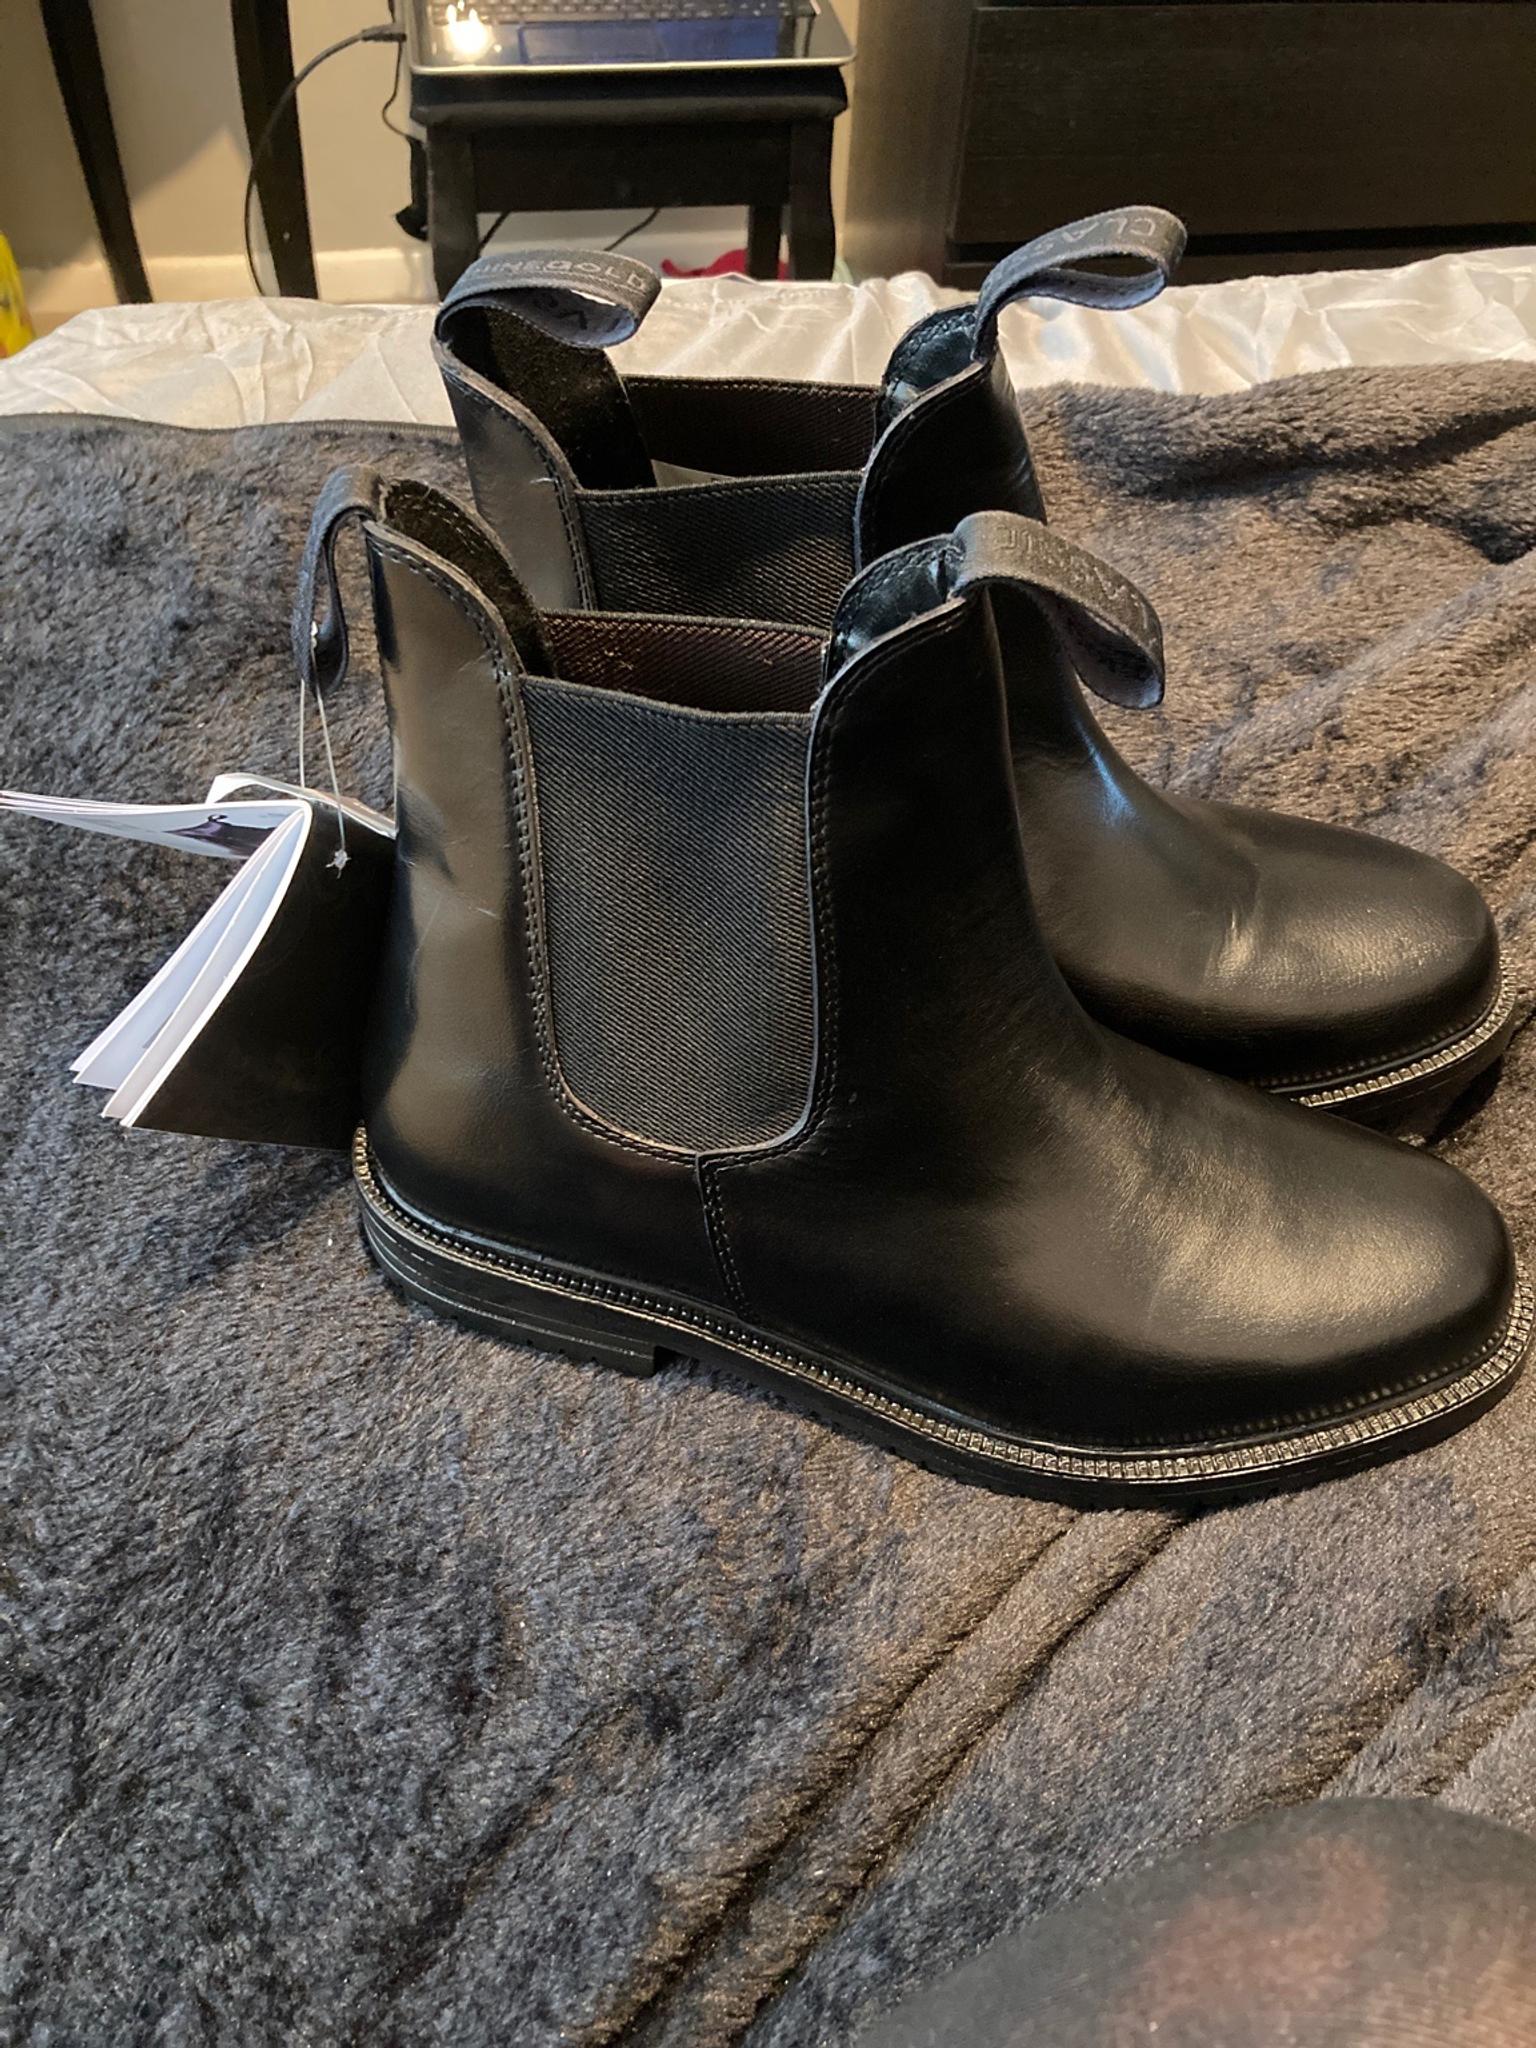 Rhinegold classic leather jodhpur boots 7 in Walsall for £12.00 for ...